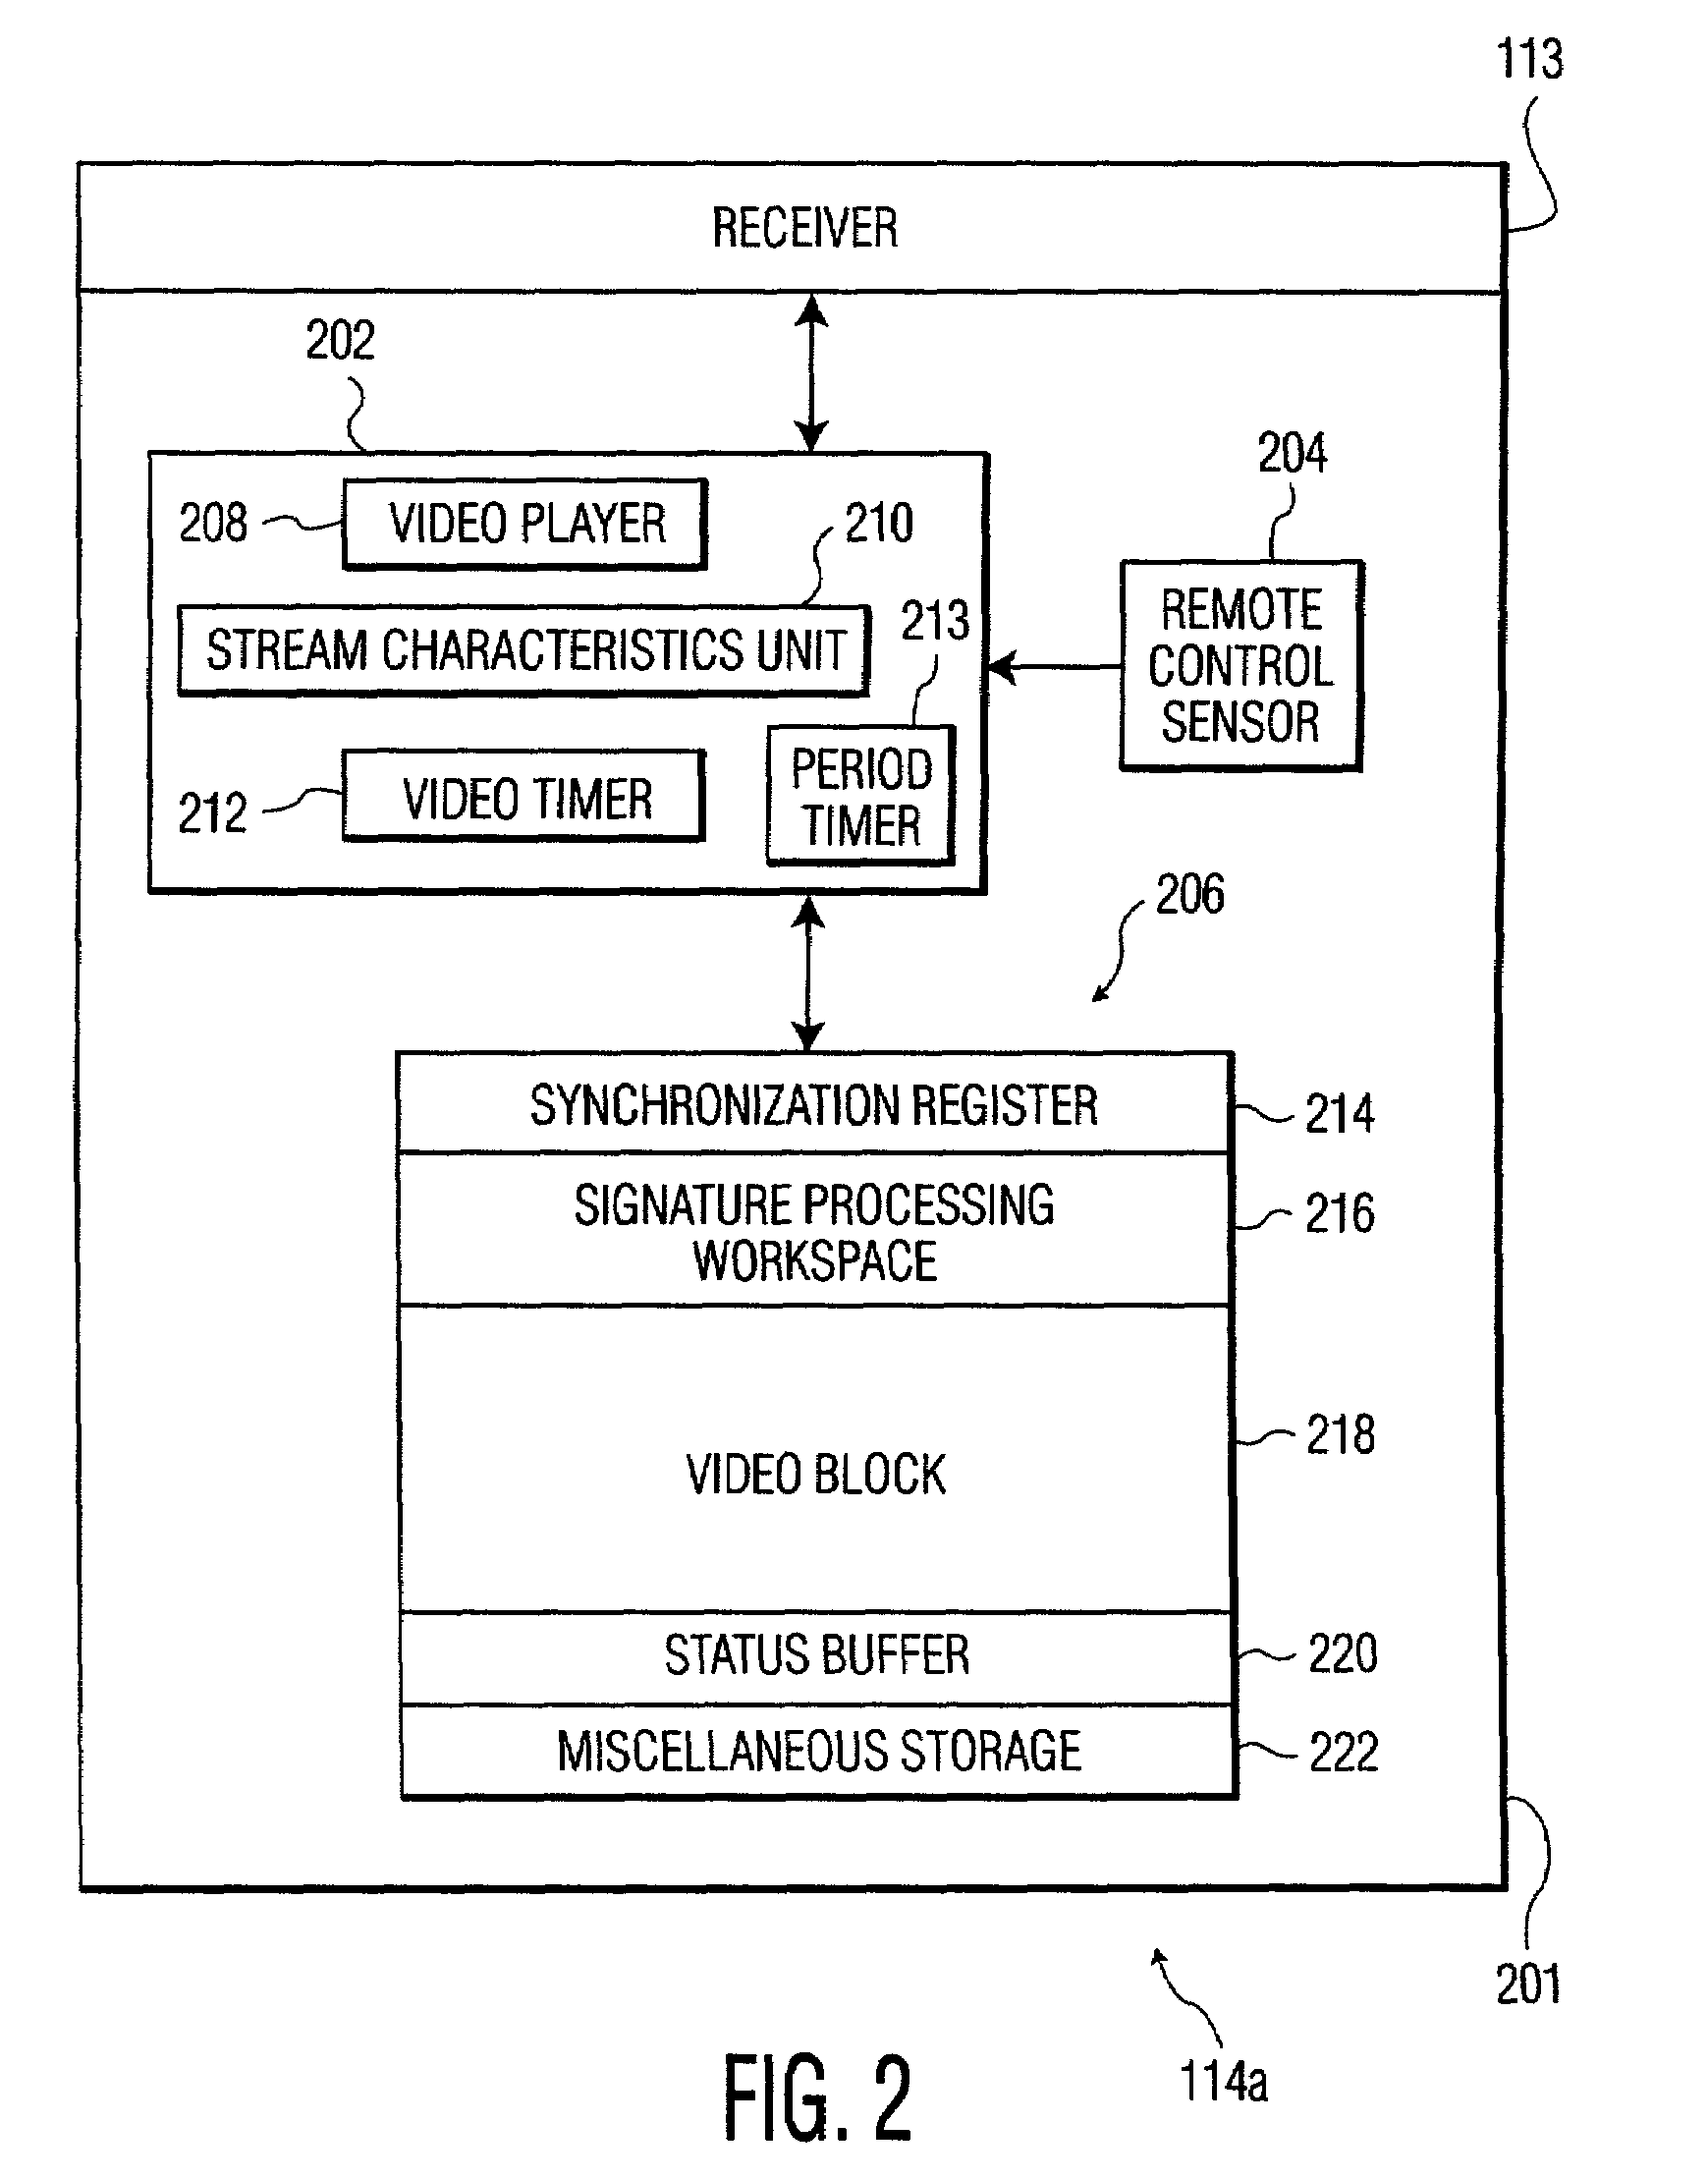 Apparatus and method for synchronizing presentation from bit streams based on their content